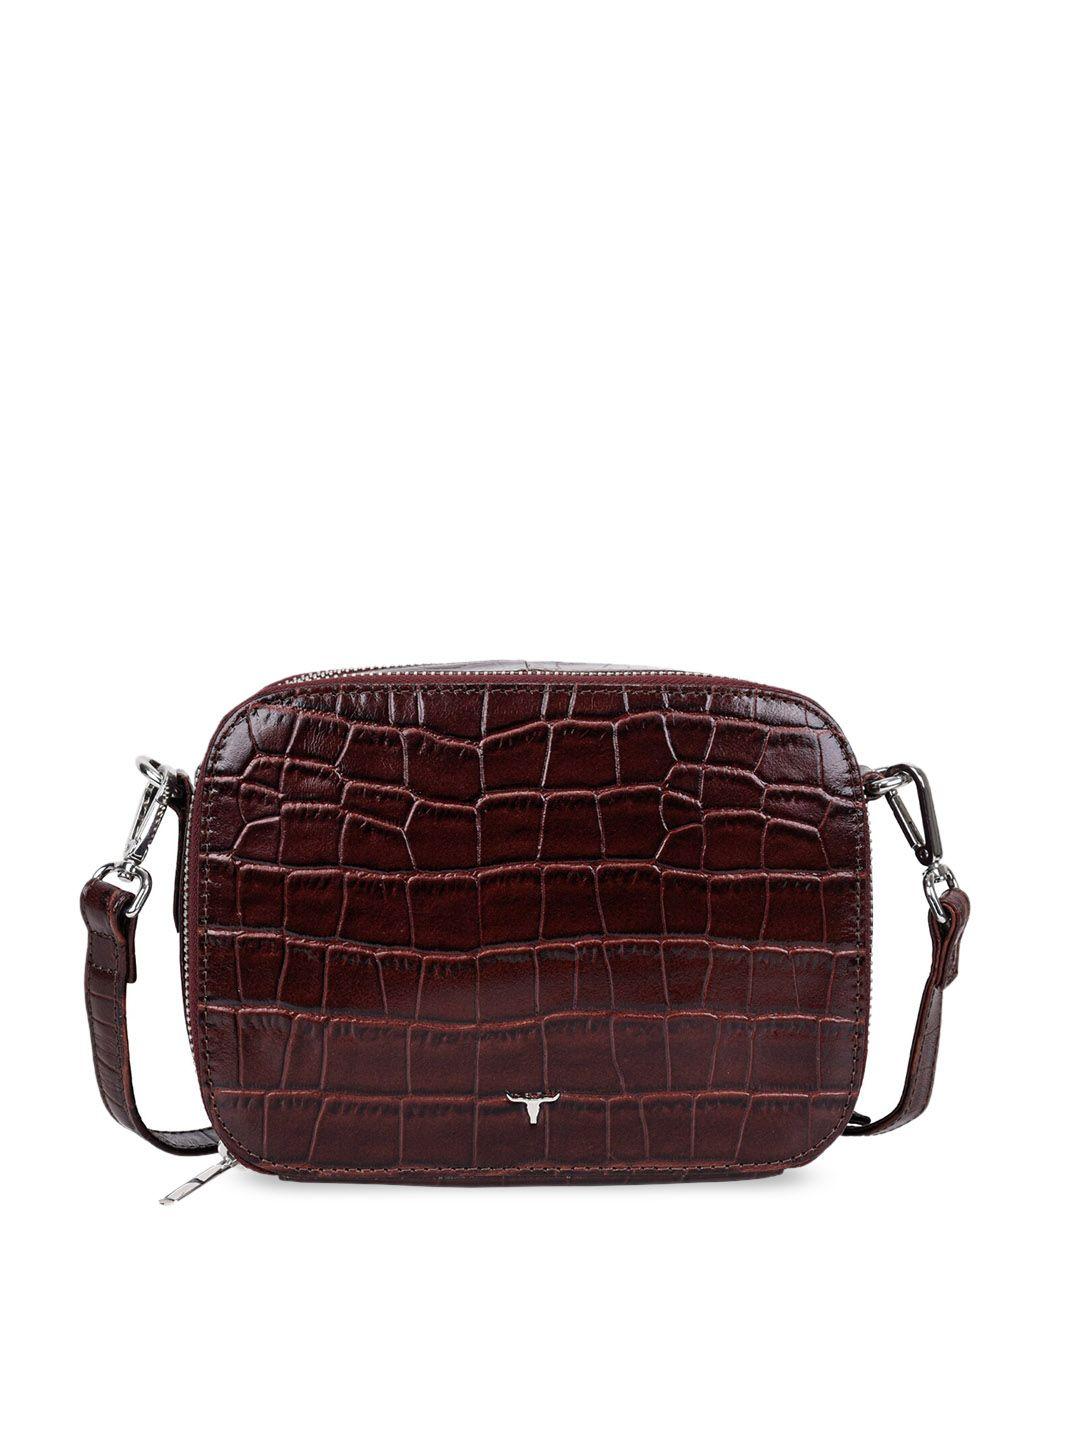 urban forest brown animal textured leather structured sling bag